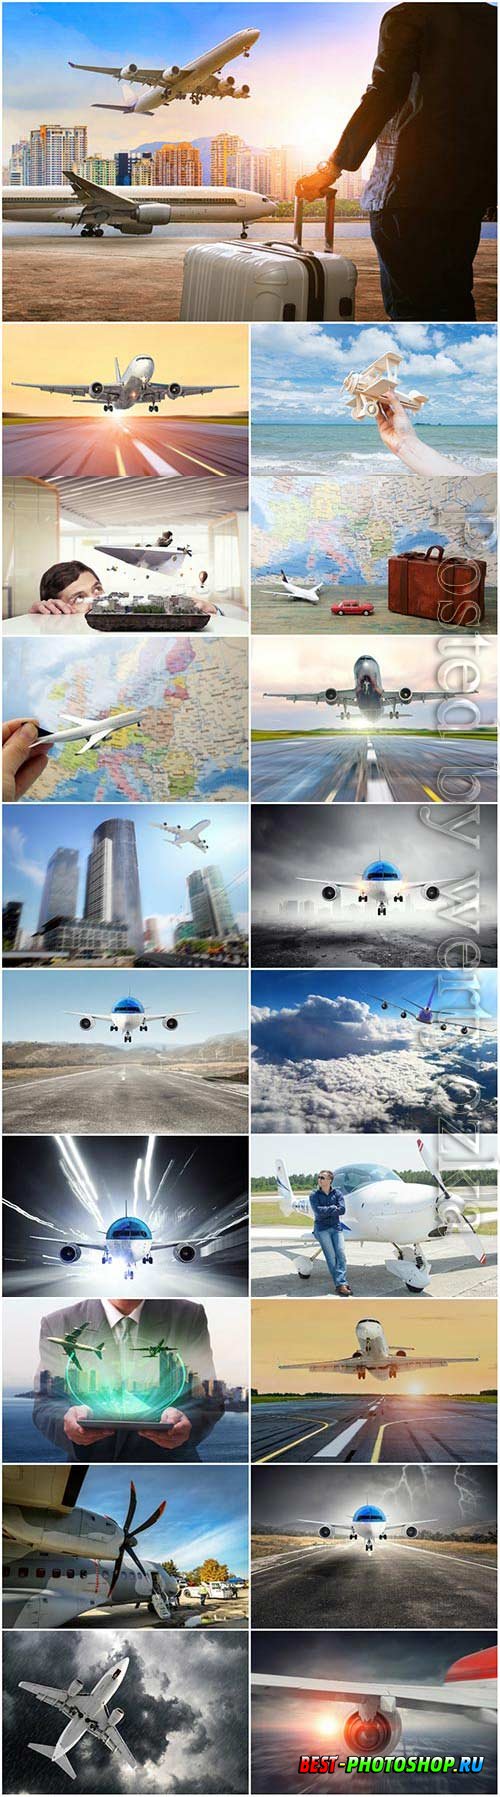 Airplanes, travel and vacation concept stock photo